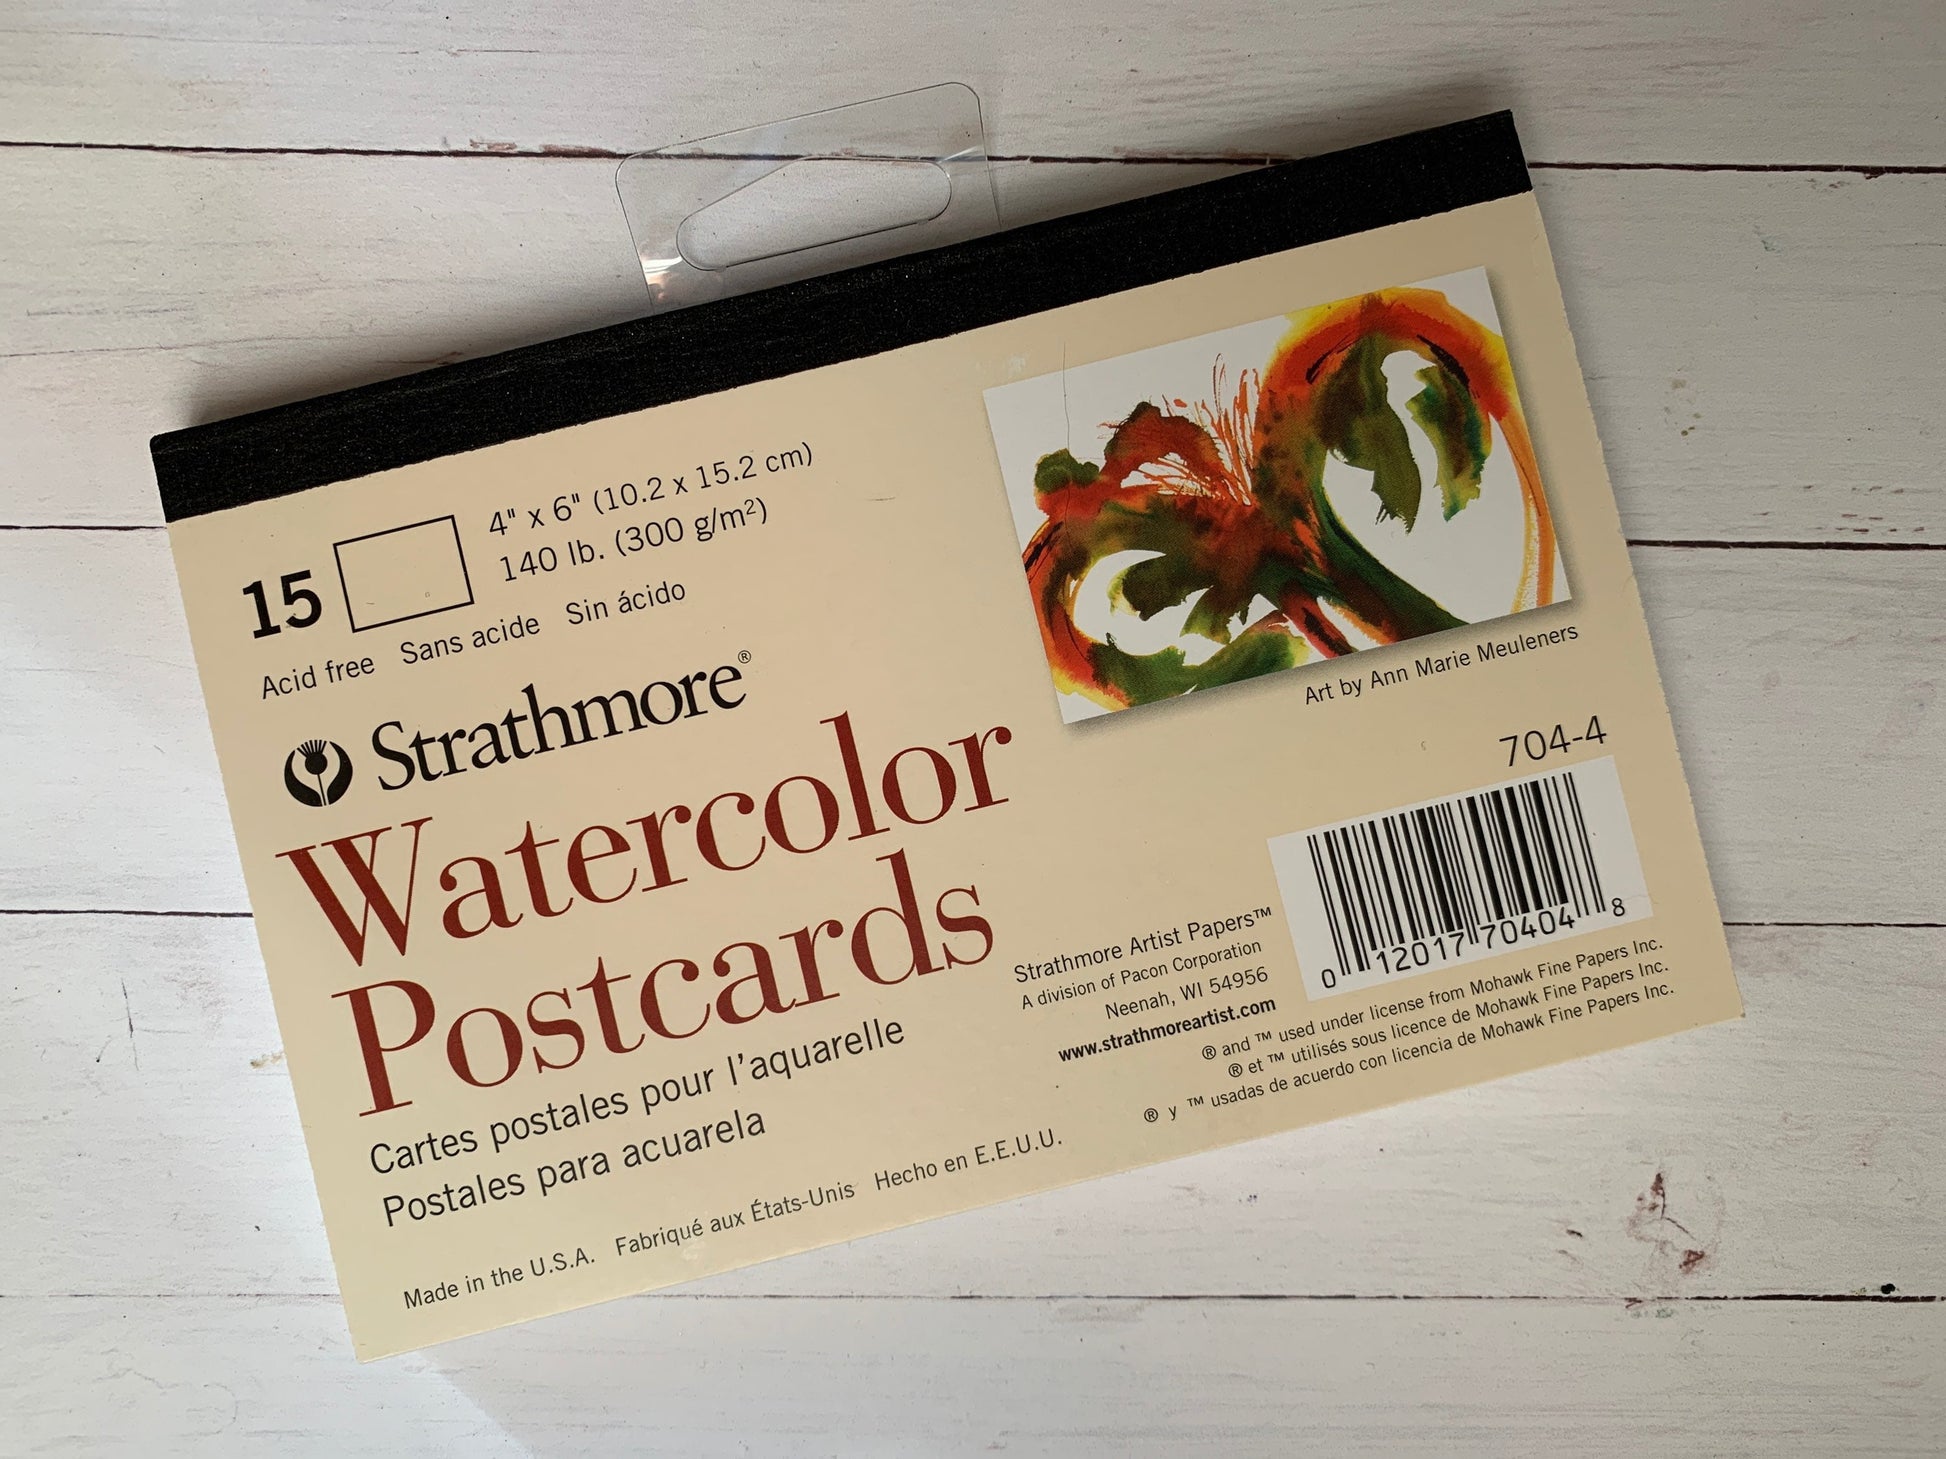 Extra Postcards for Watercolor Postcard Kits, Strathmore or Etchr brand postcards